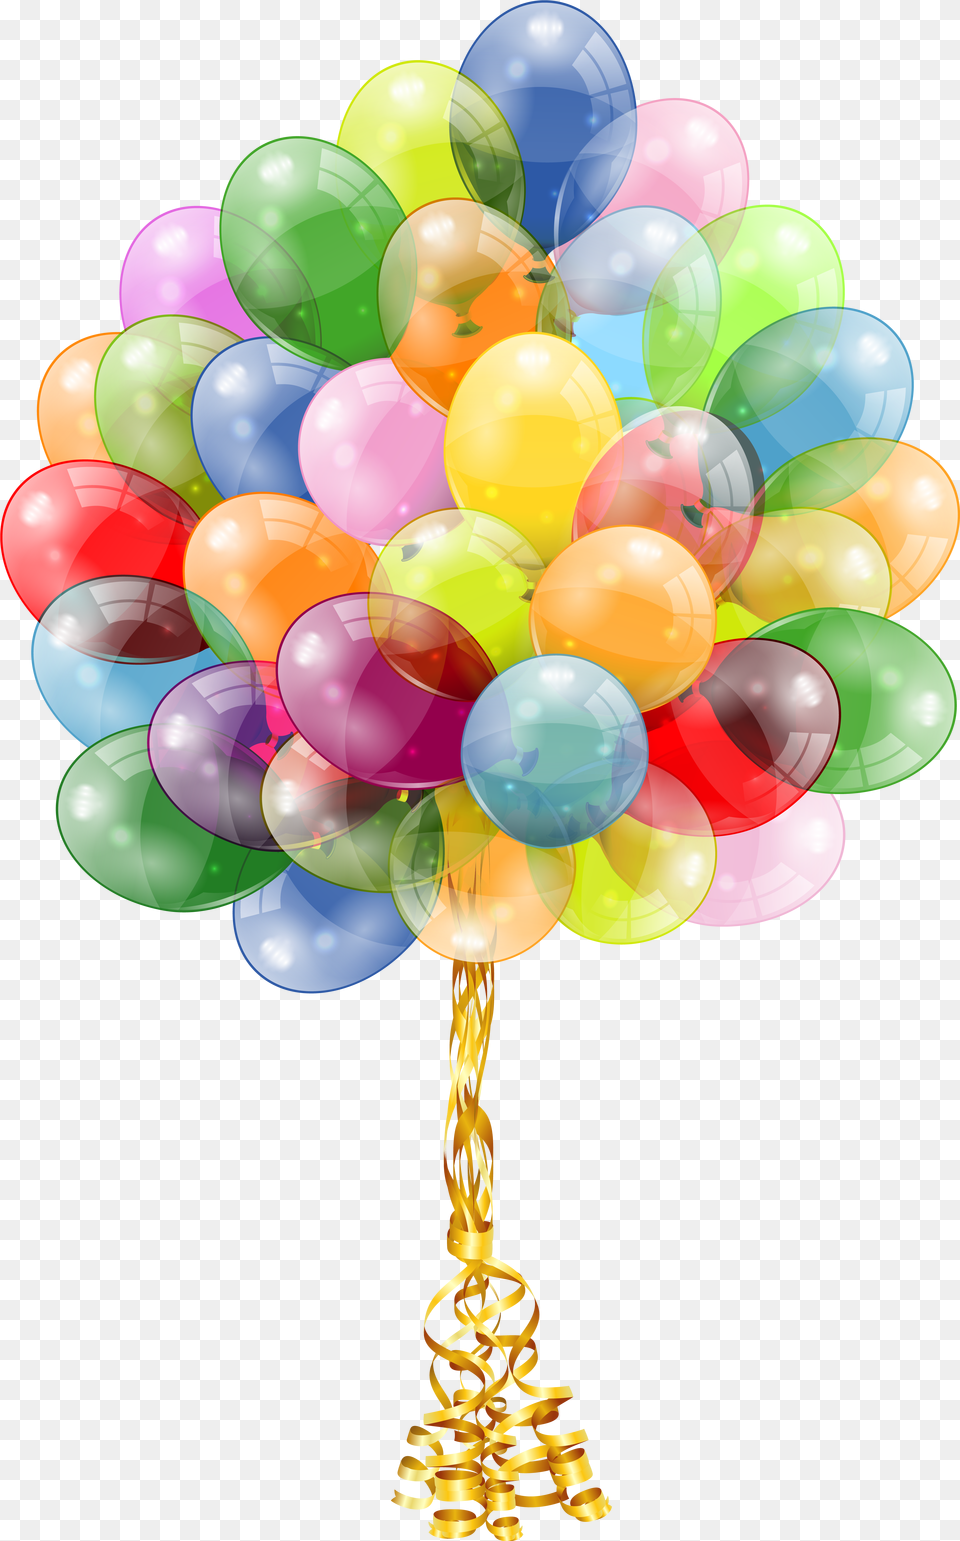 Real Balloon Bunch Of Balloons Transparent Background, Paper, Towel Png Image